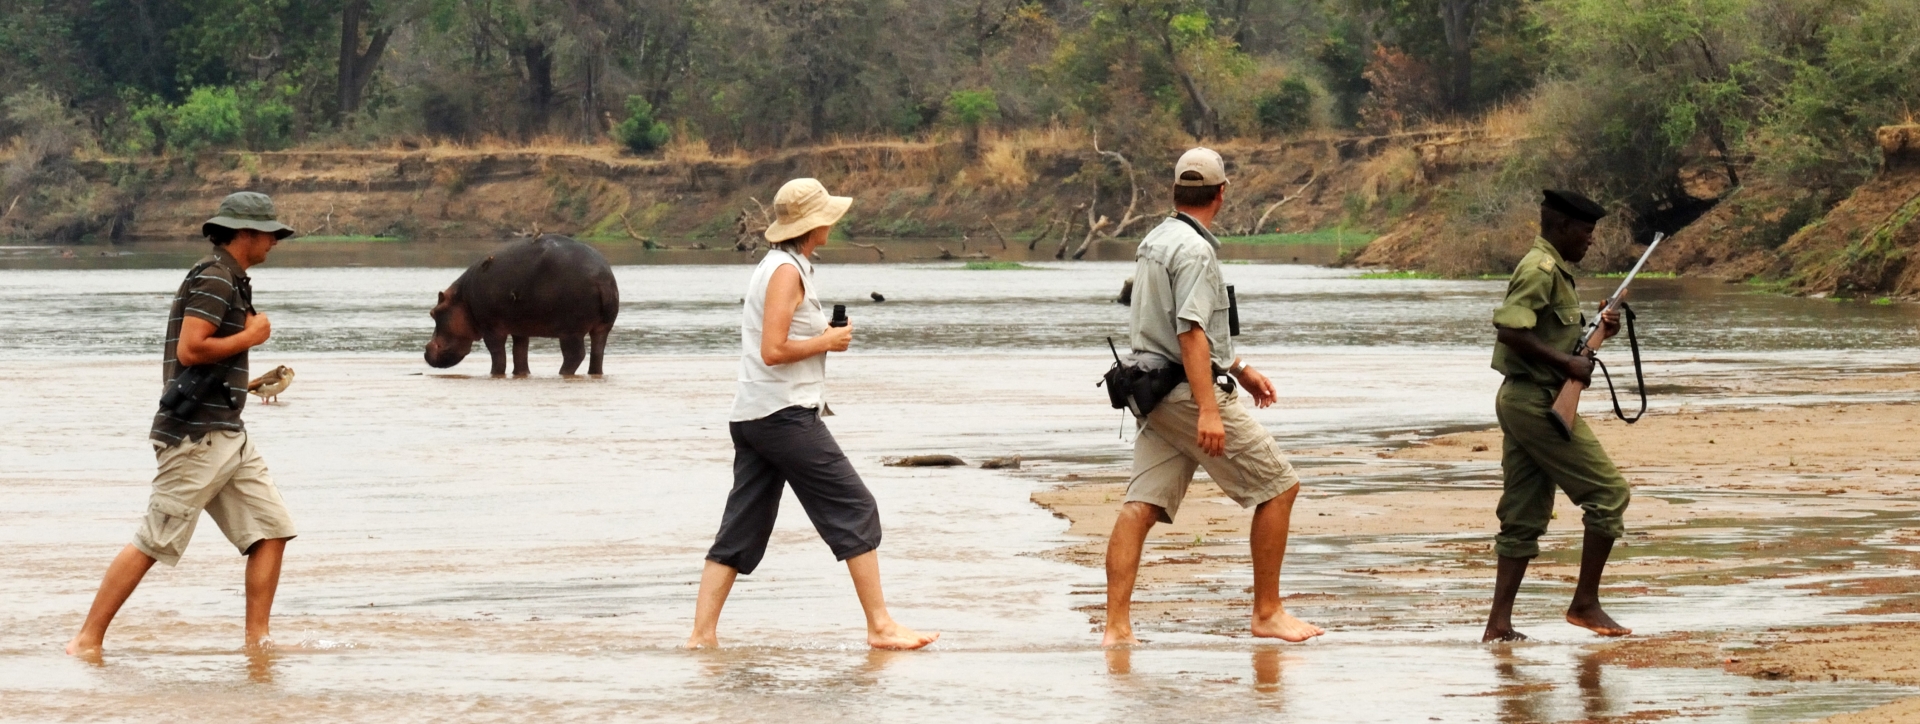 Crossing the Luangwa River 